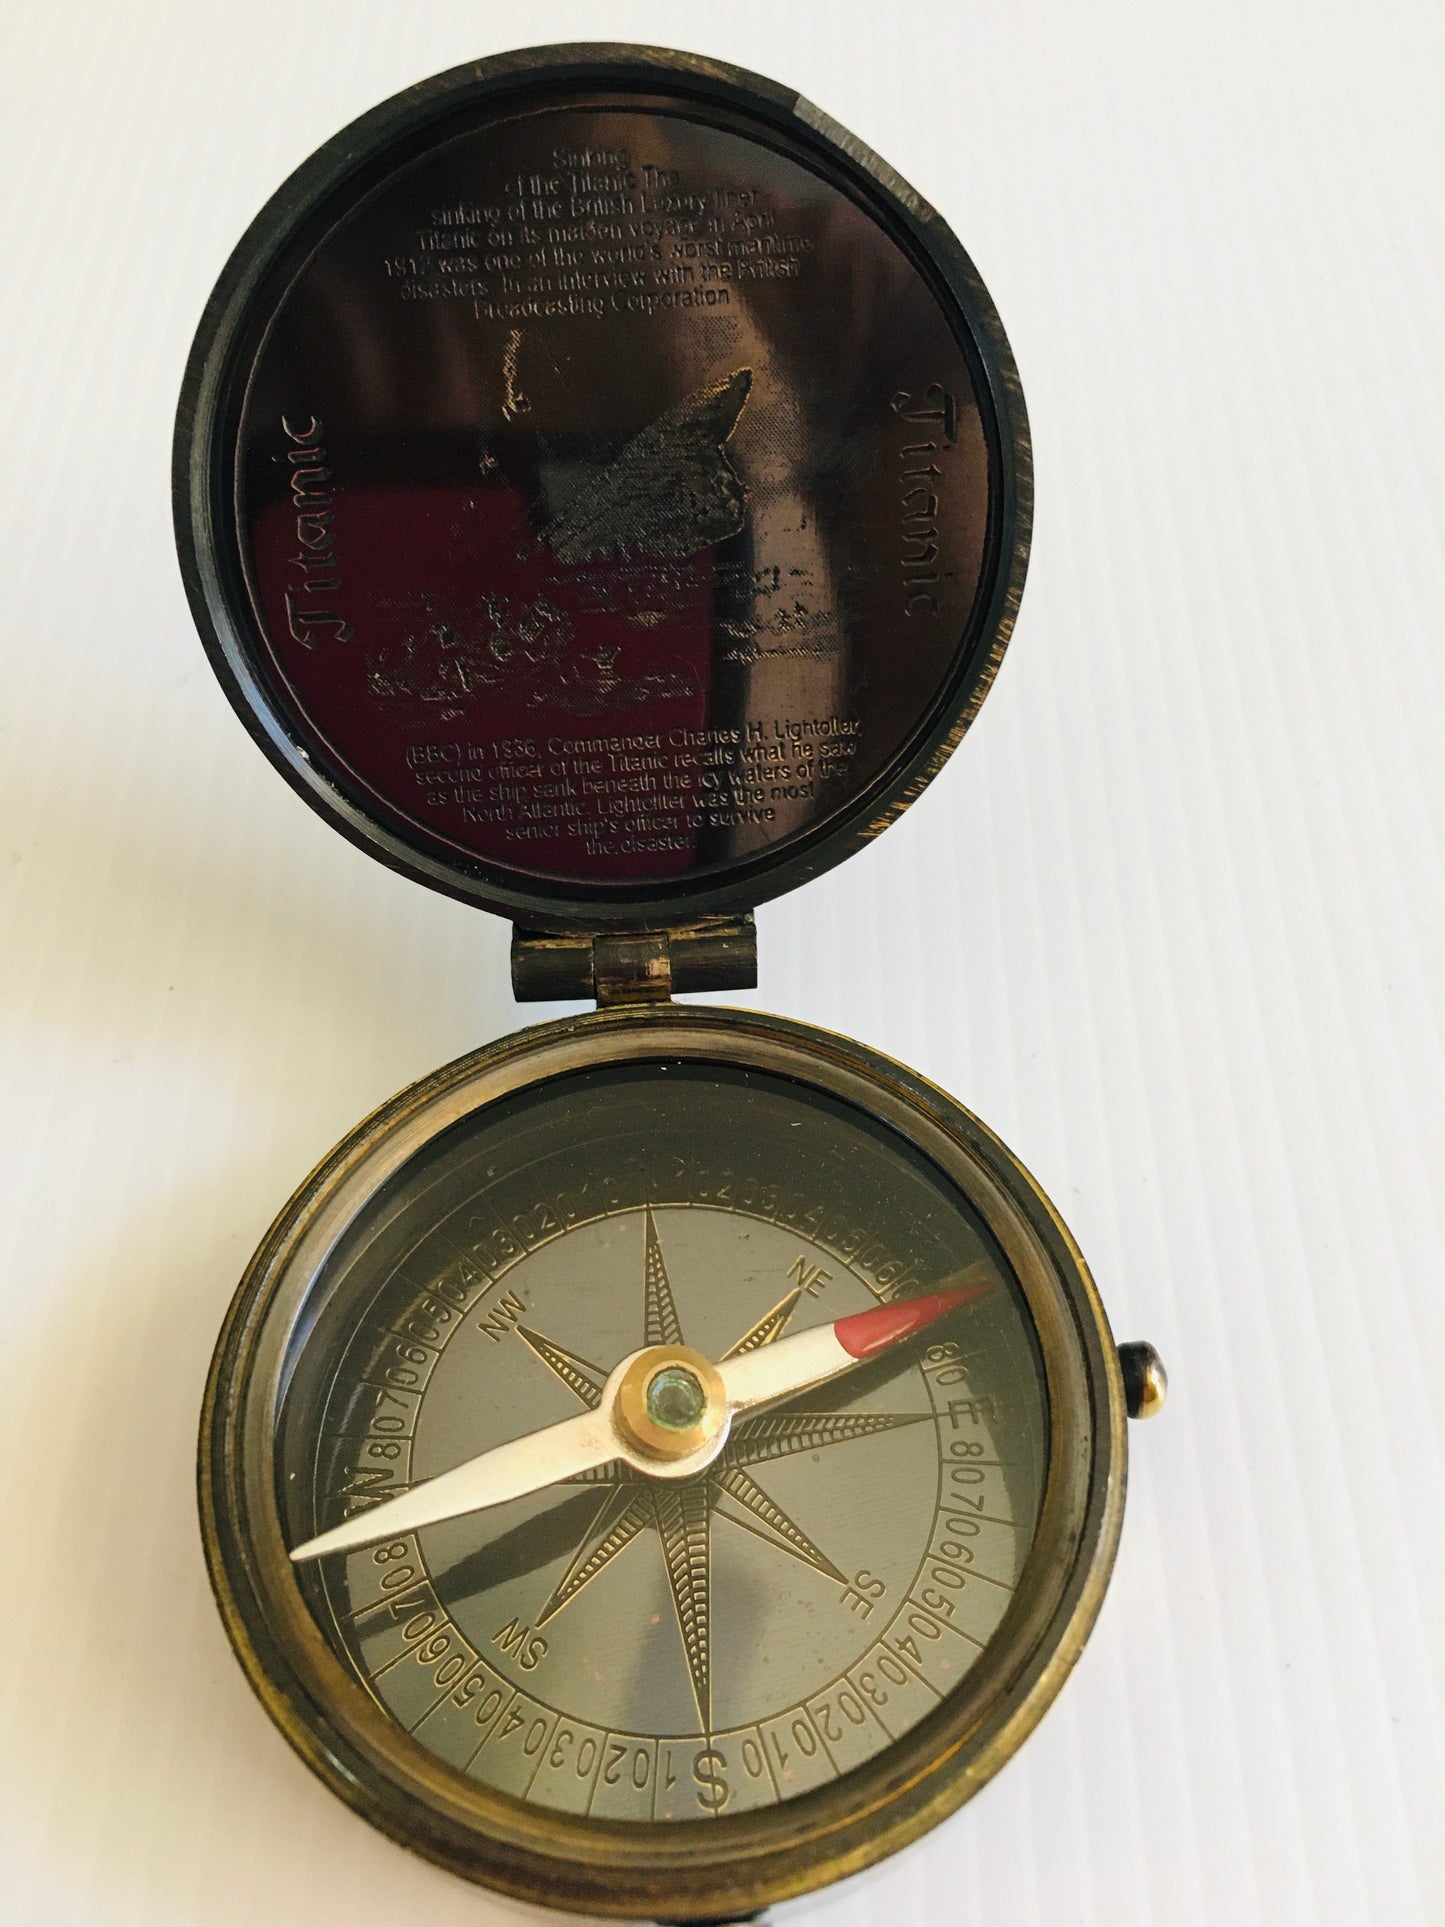 Compass 2 " Solid Brass with flip top lid  Titanic 1912 Remembrance item